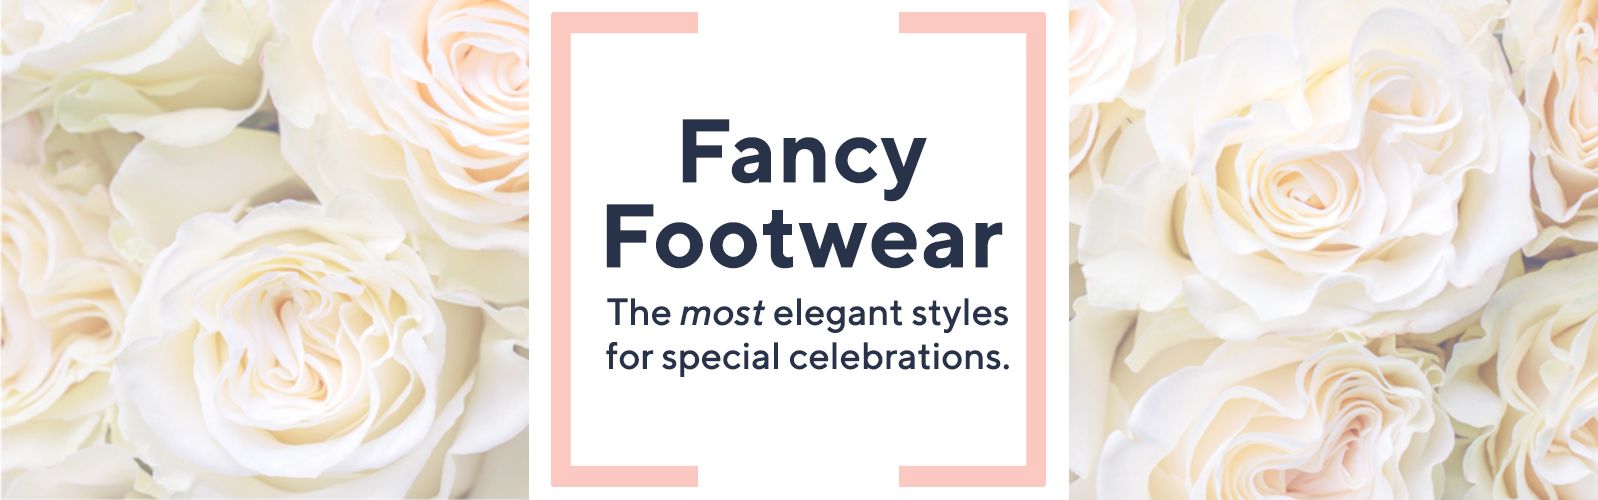 Fancy Footwear The most elegant styles for special celebrations.